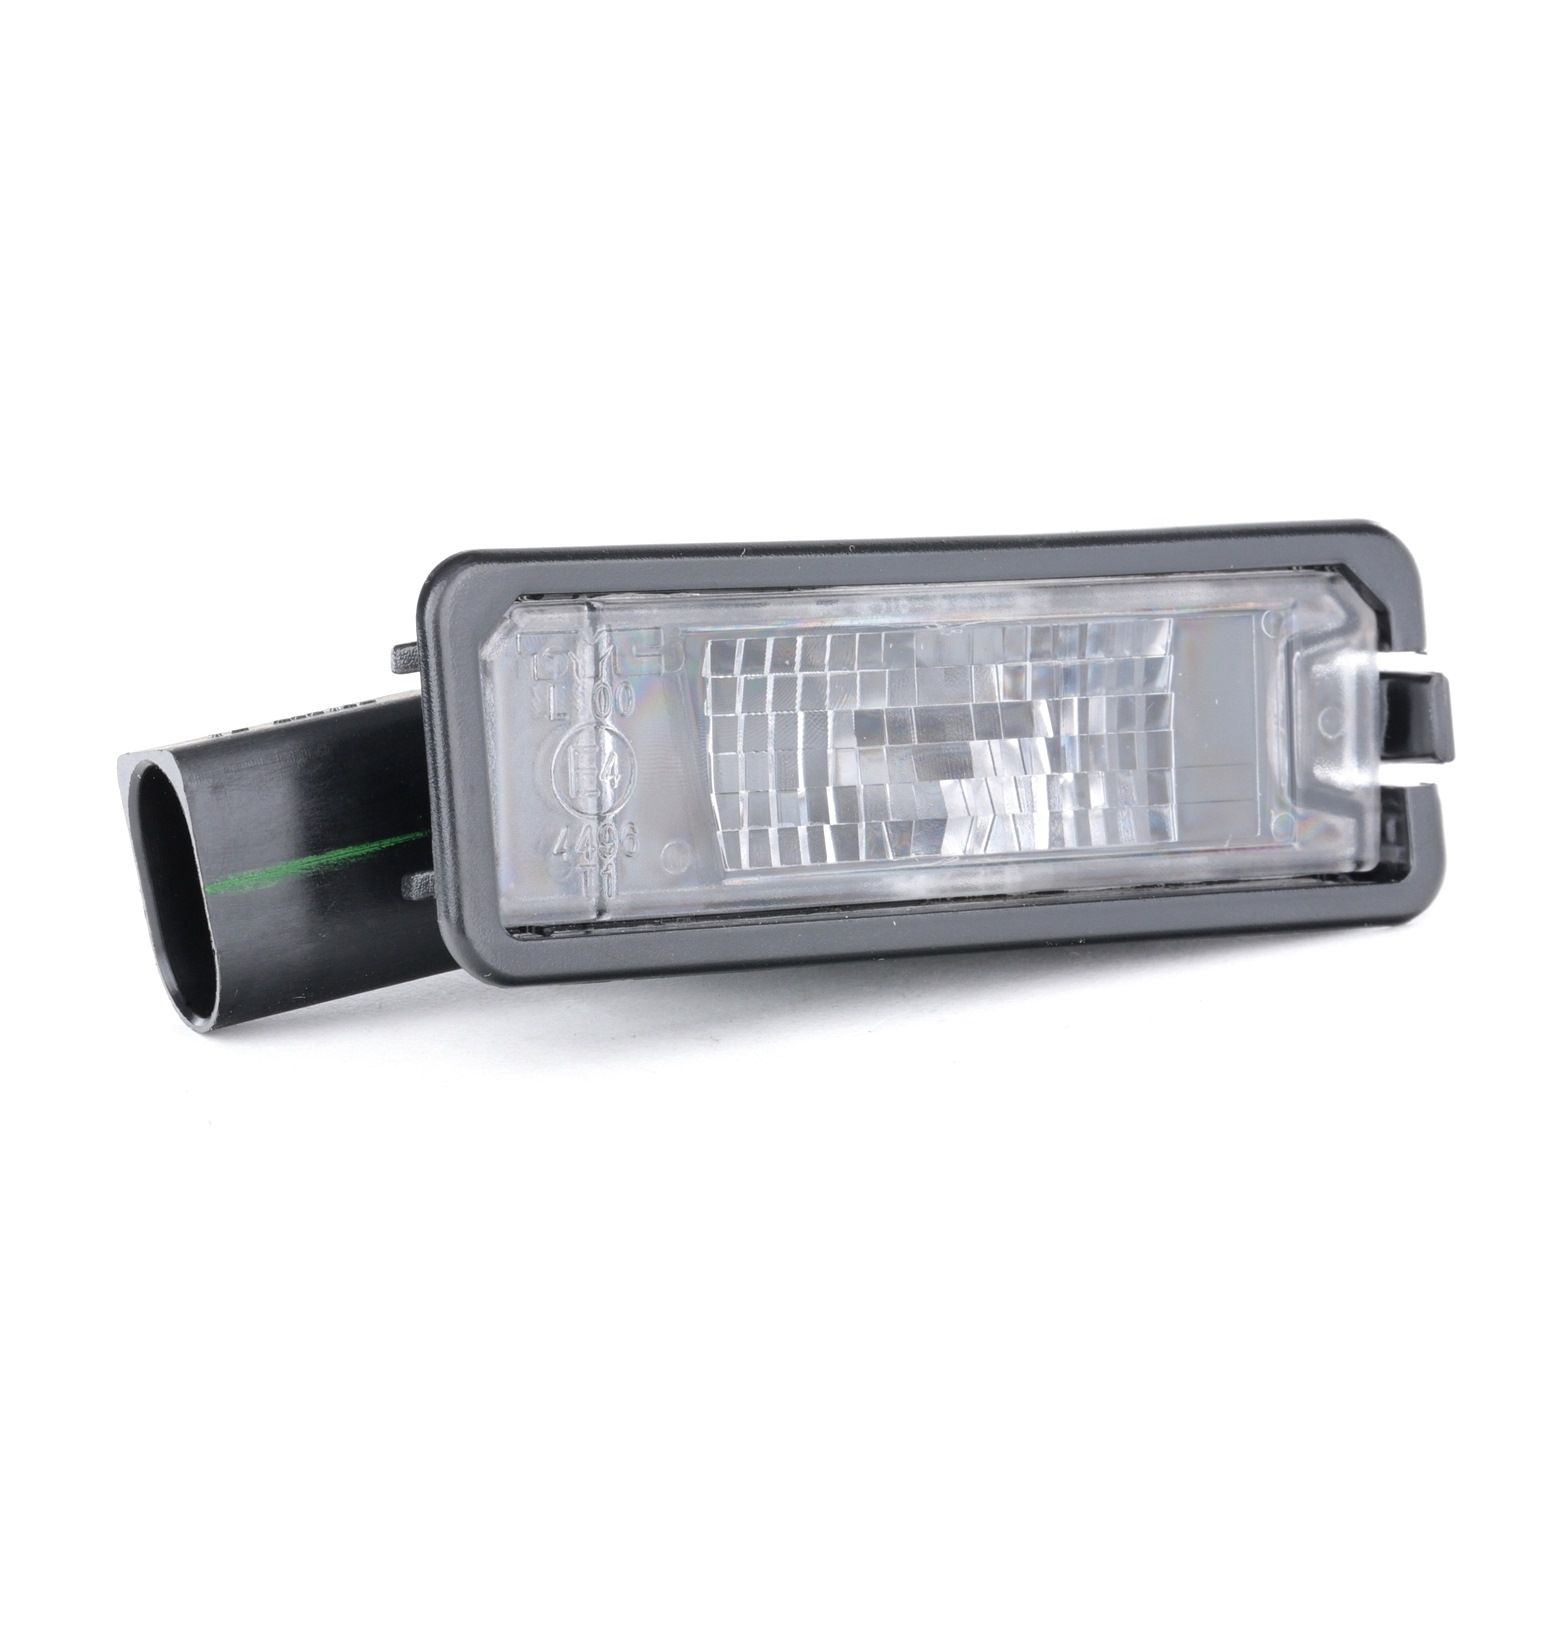 Volkswagen Licence Plate Light TYC 15-0181-00-2 at a good price